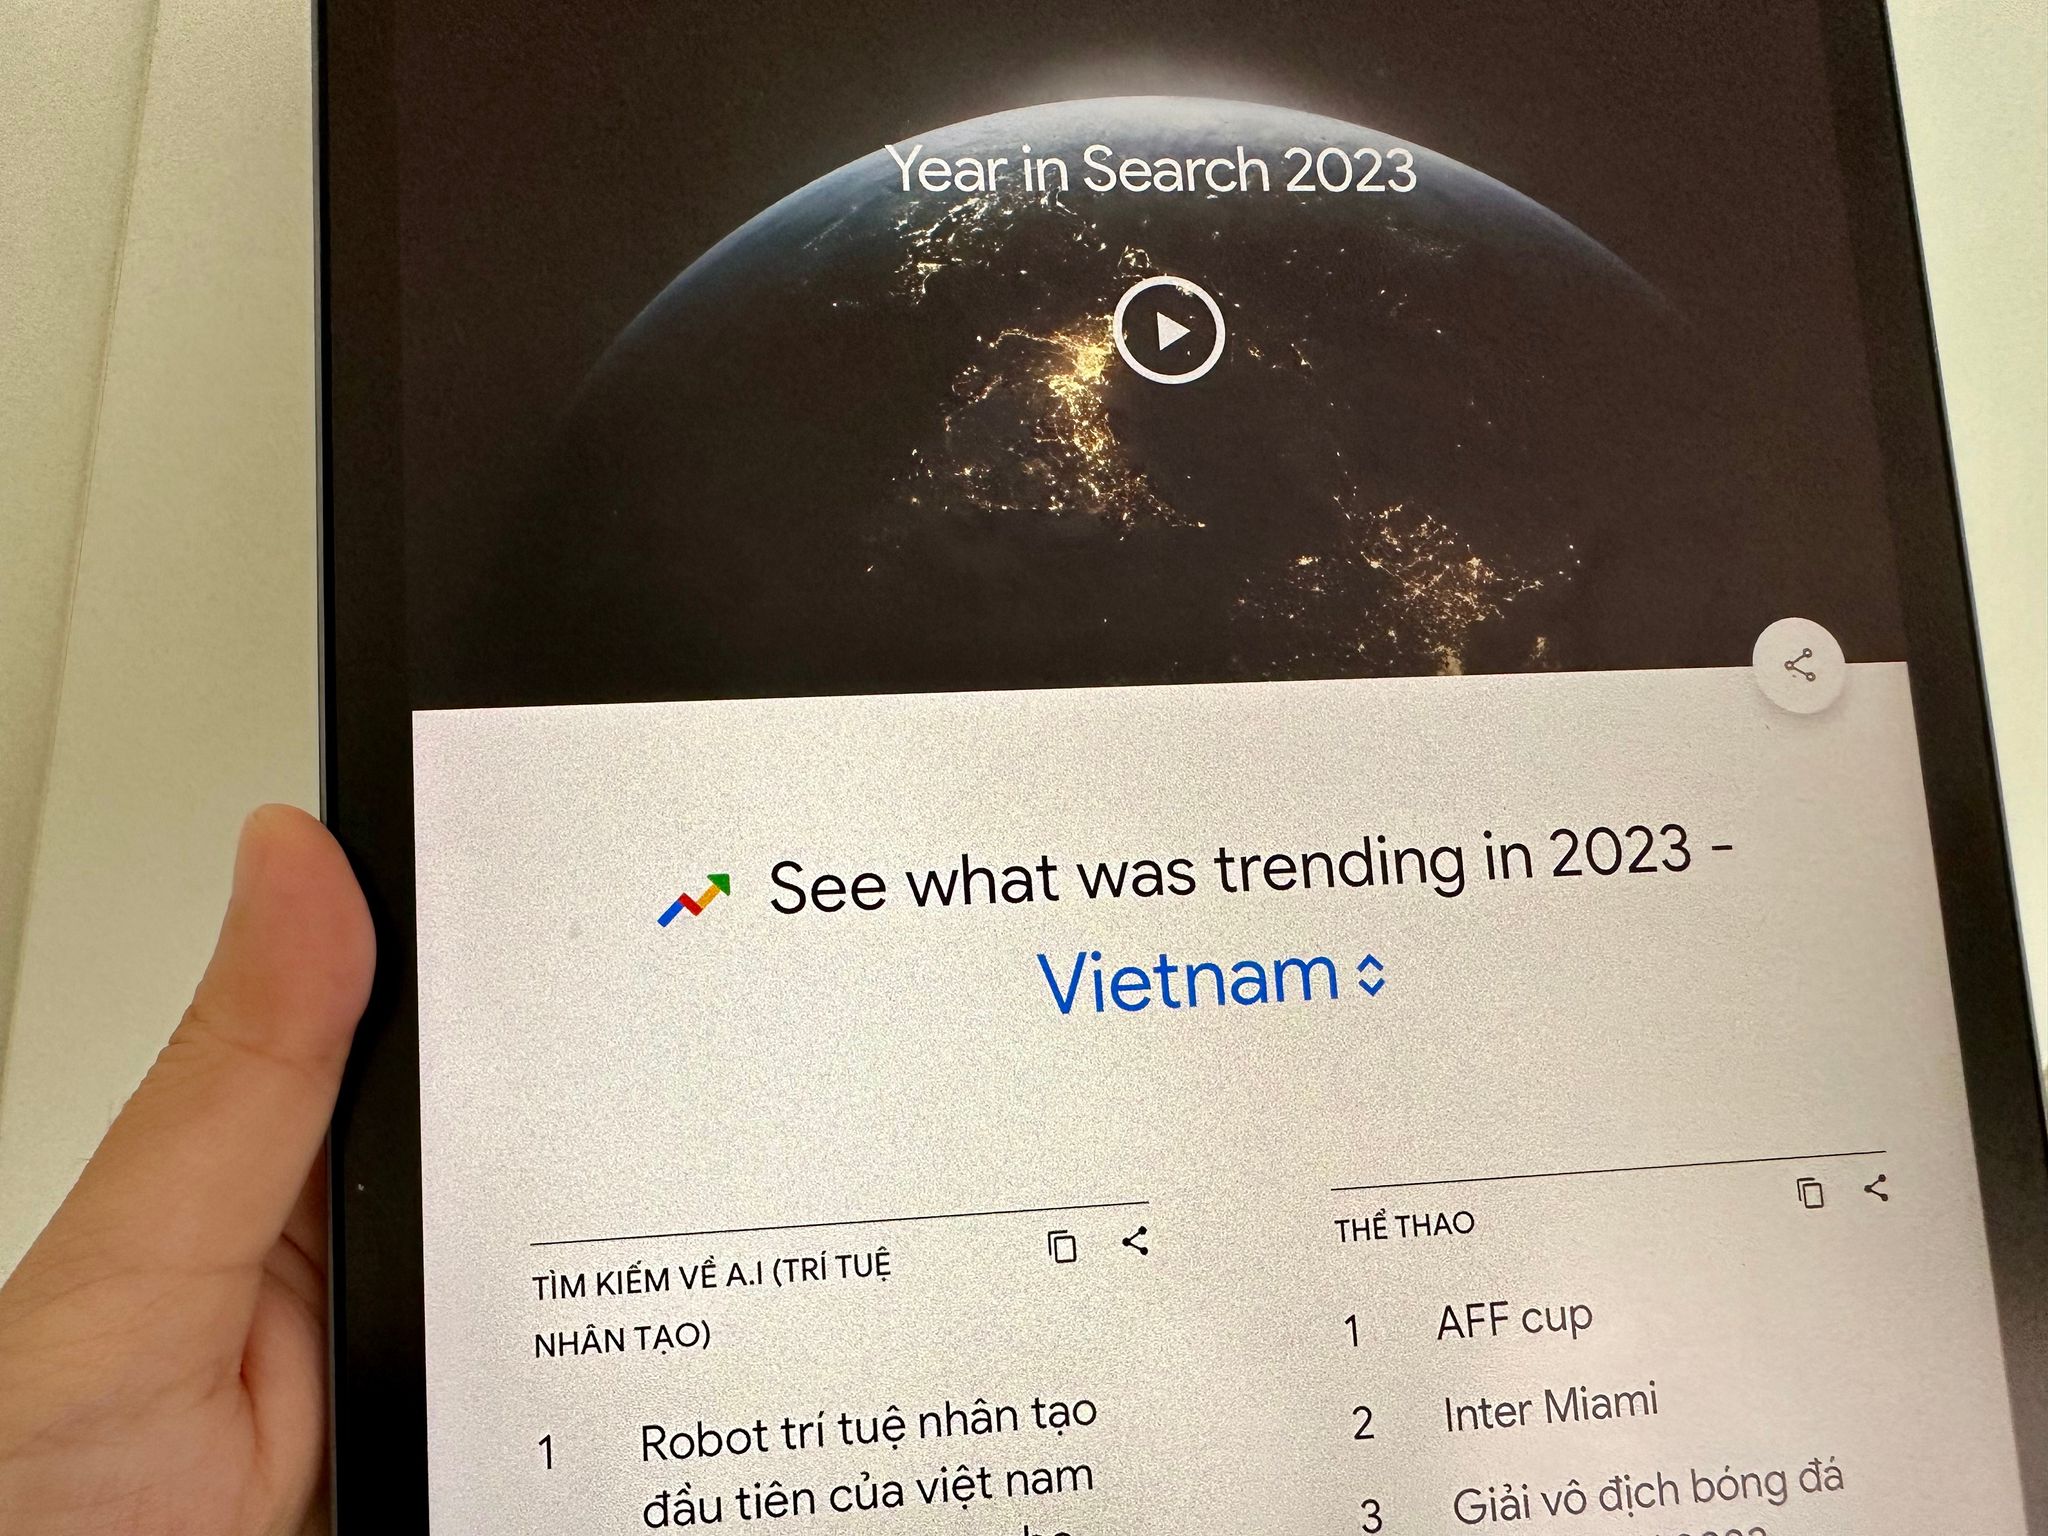 AI, football, travel among Vietnam’s leading Google search trends in 2023